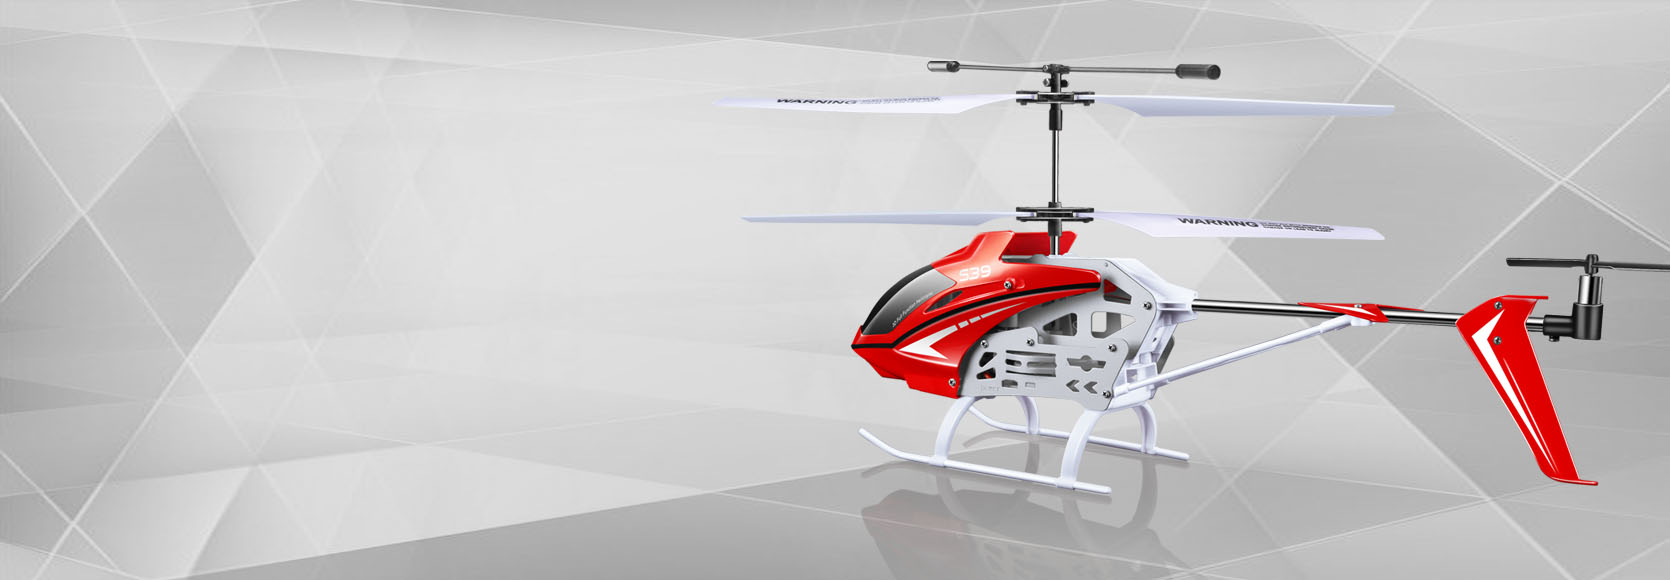 s39 raptor helicopter